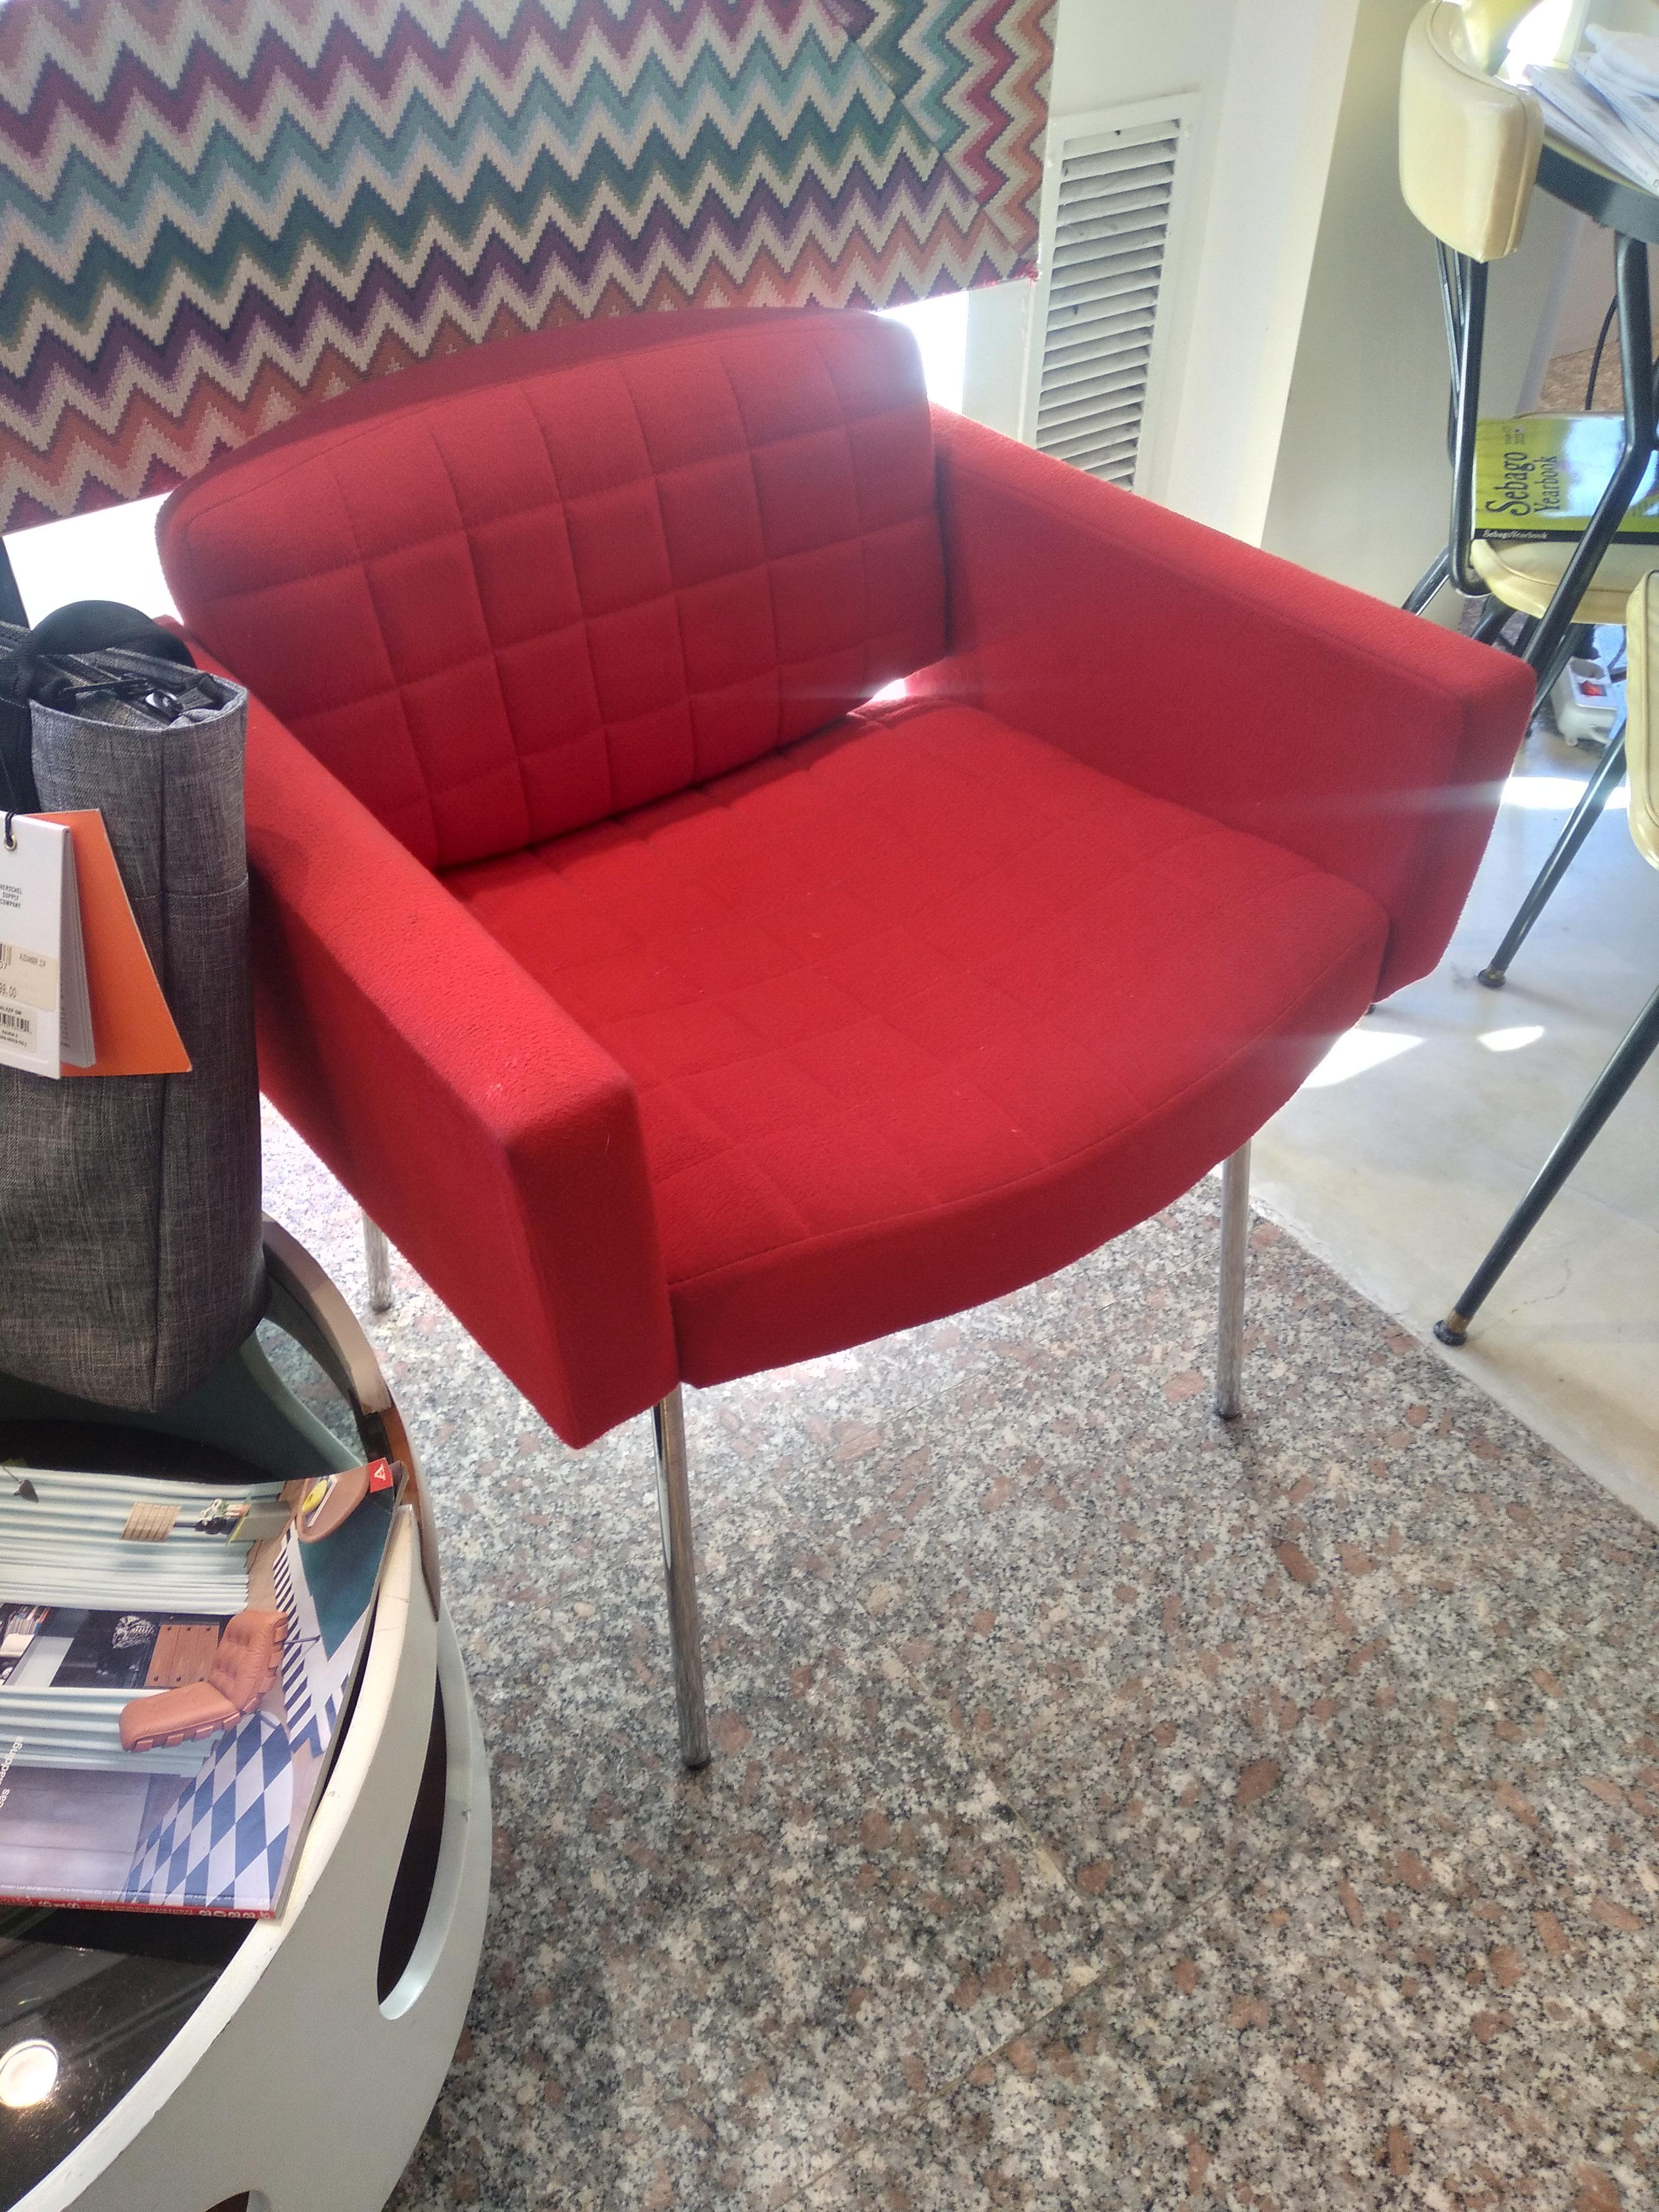 Pair Conseil Red Armchairs by Pierre Guariche from Meurop Belgium 1960s.
Pair of armchairs model Conseil by Pierre Guariche production Meurop Belgium 1960 .These pair of armchairs are original intact and perfect have the original red fabric .They